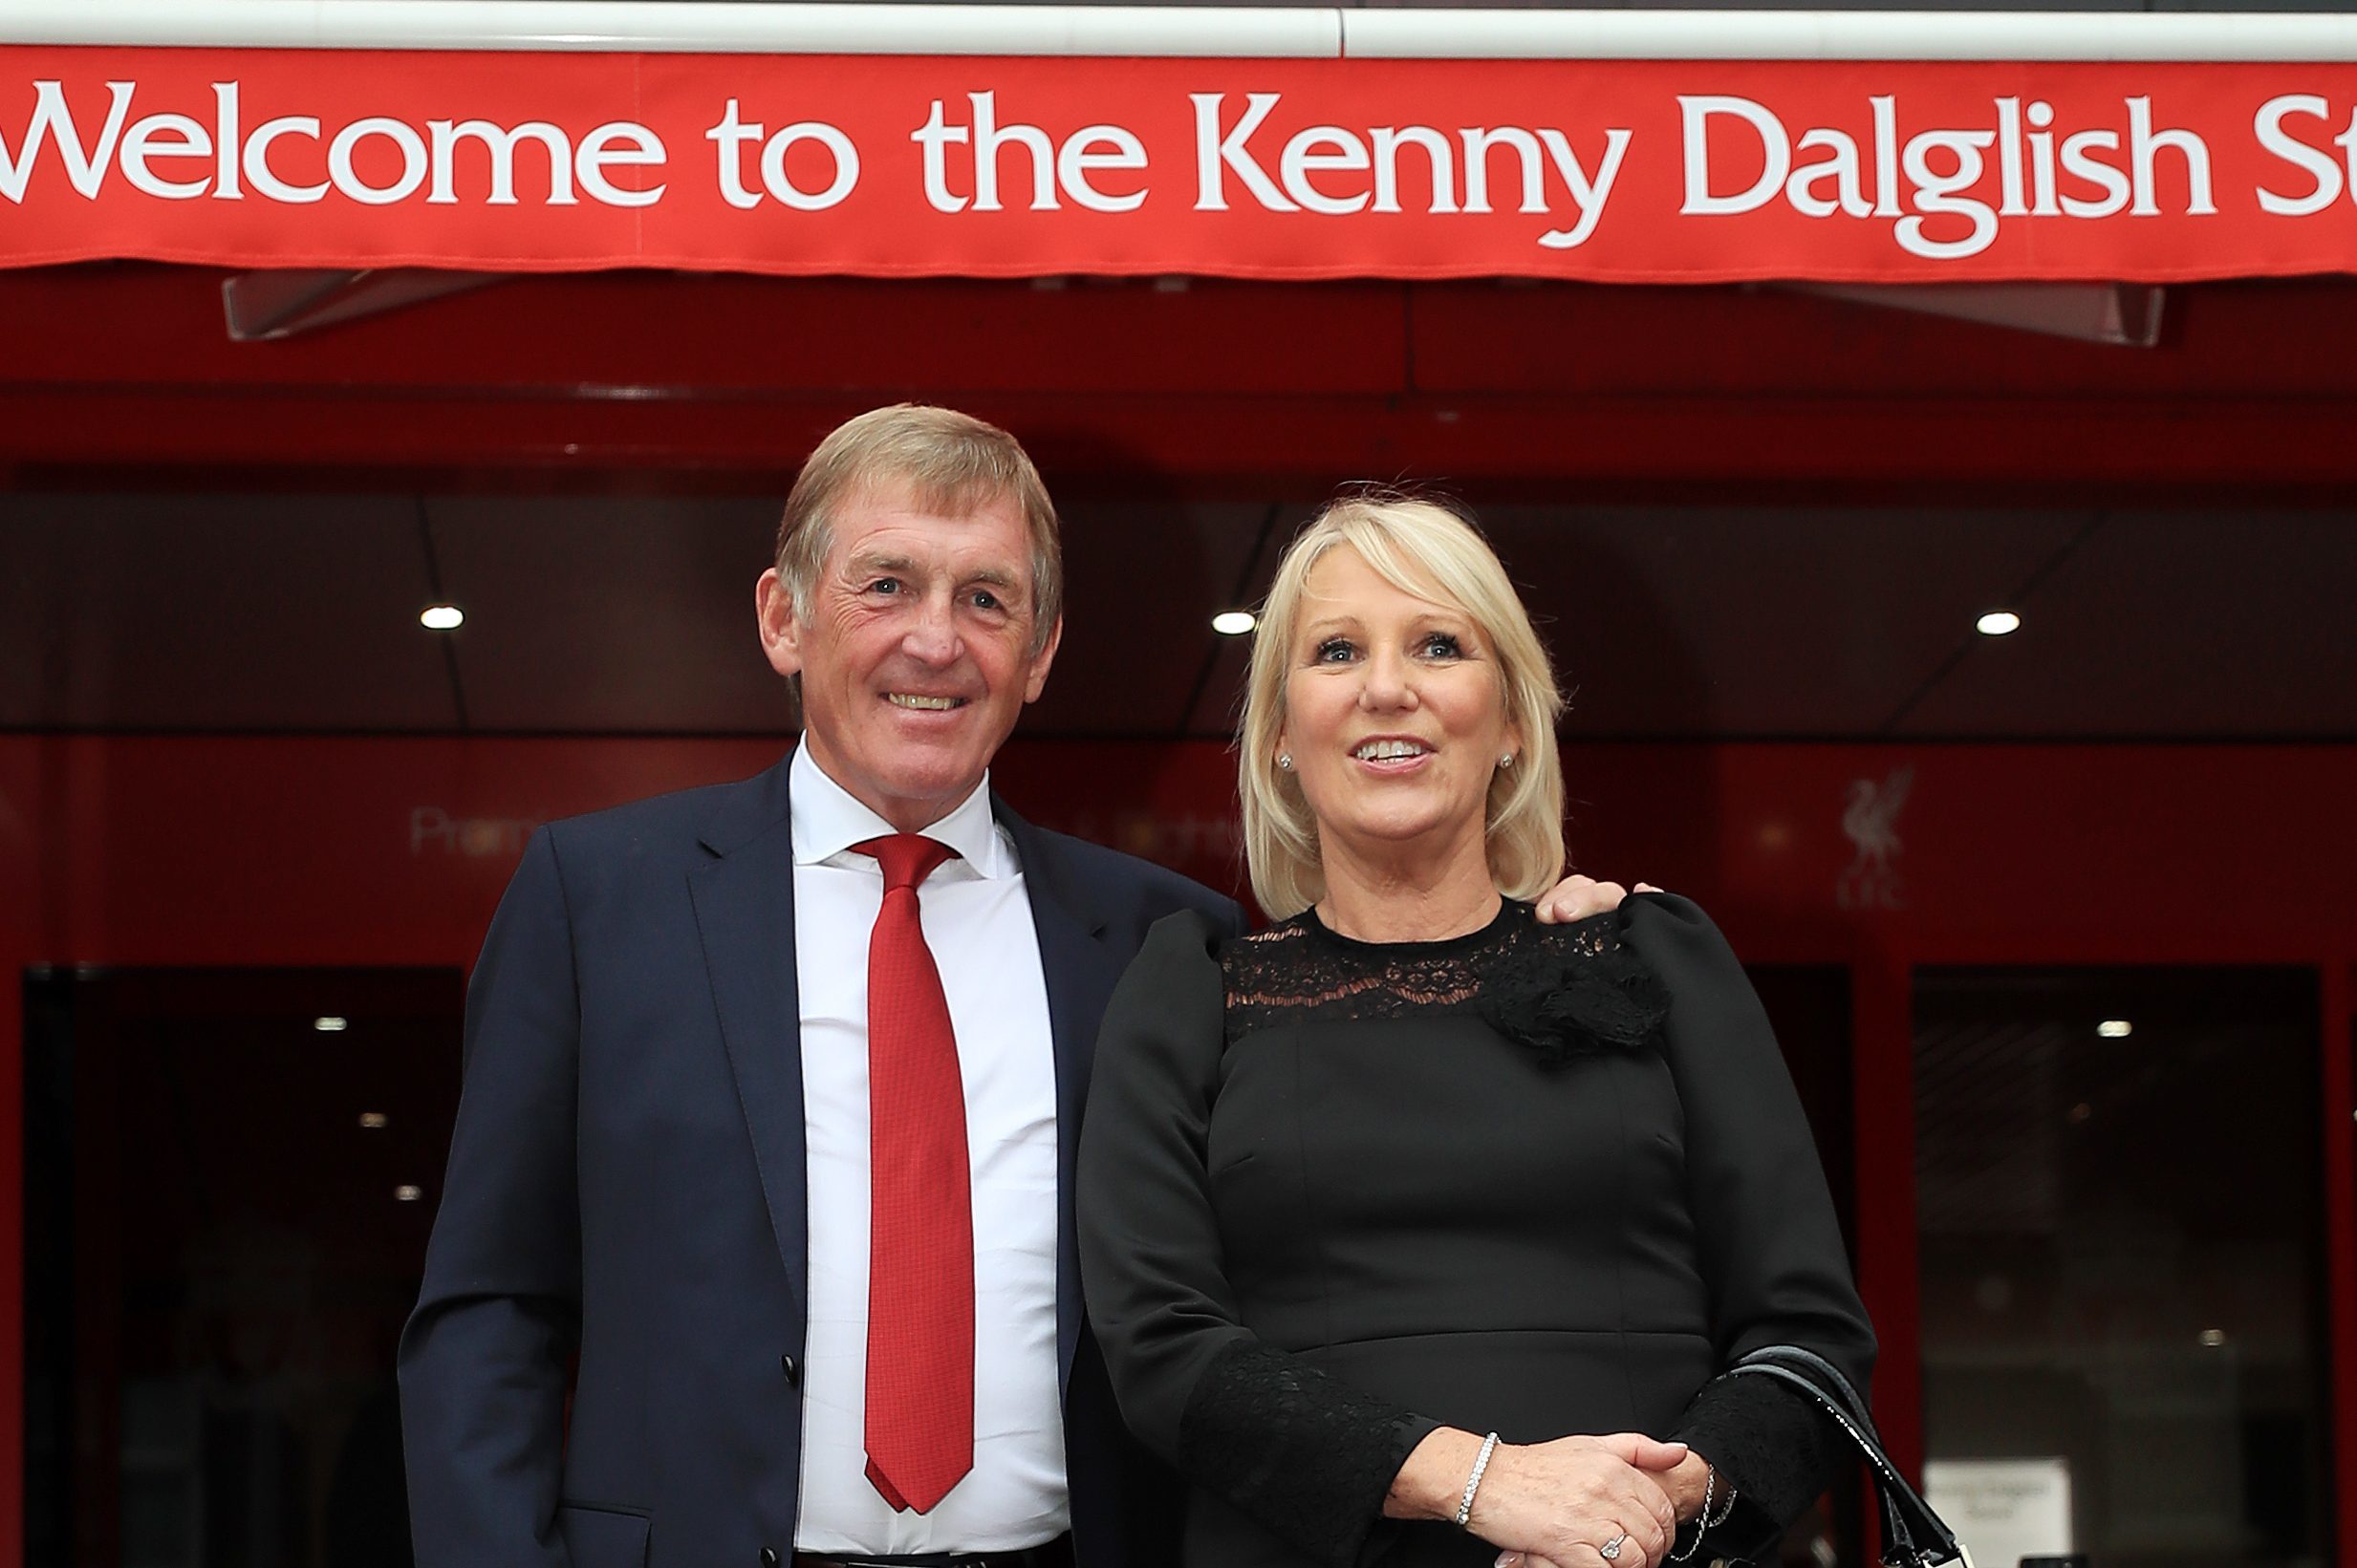 Kenny Dalglish with wife Marina during the Kenny Dalglish Stand opening event at Anfield (PA Wire)